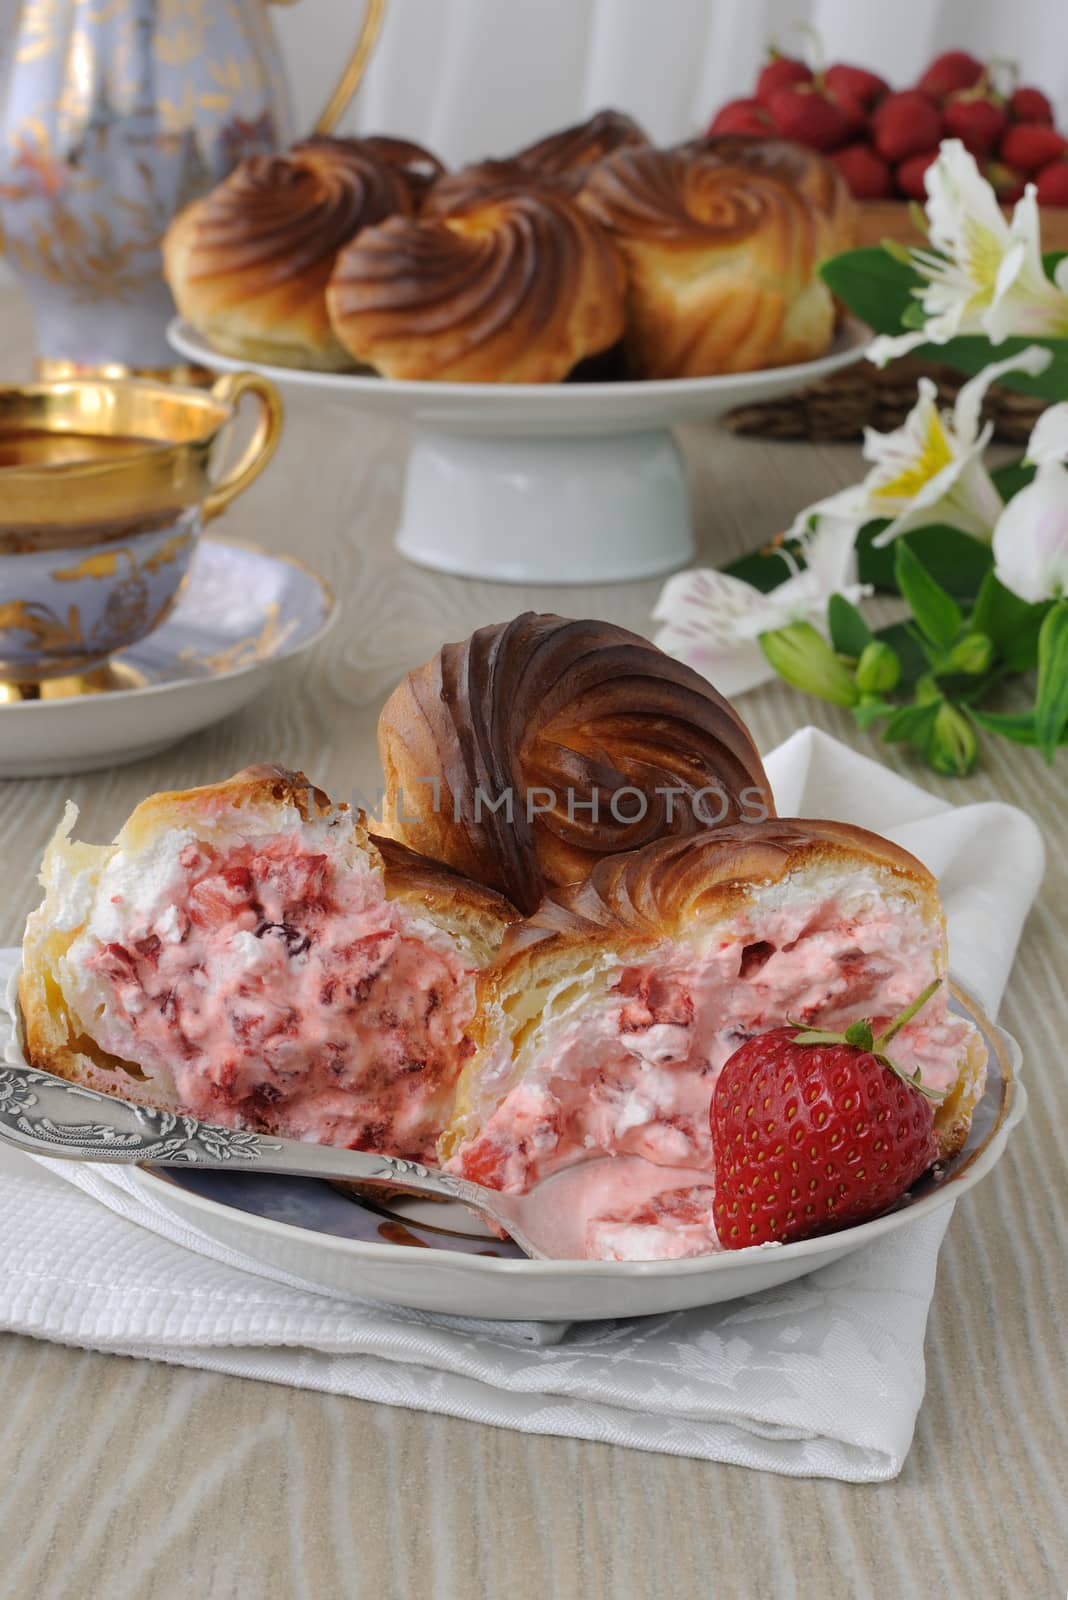 éclairs  with strawberry cream filling by Apolonia